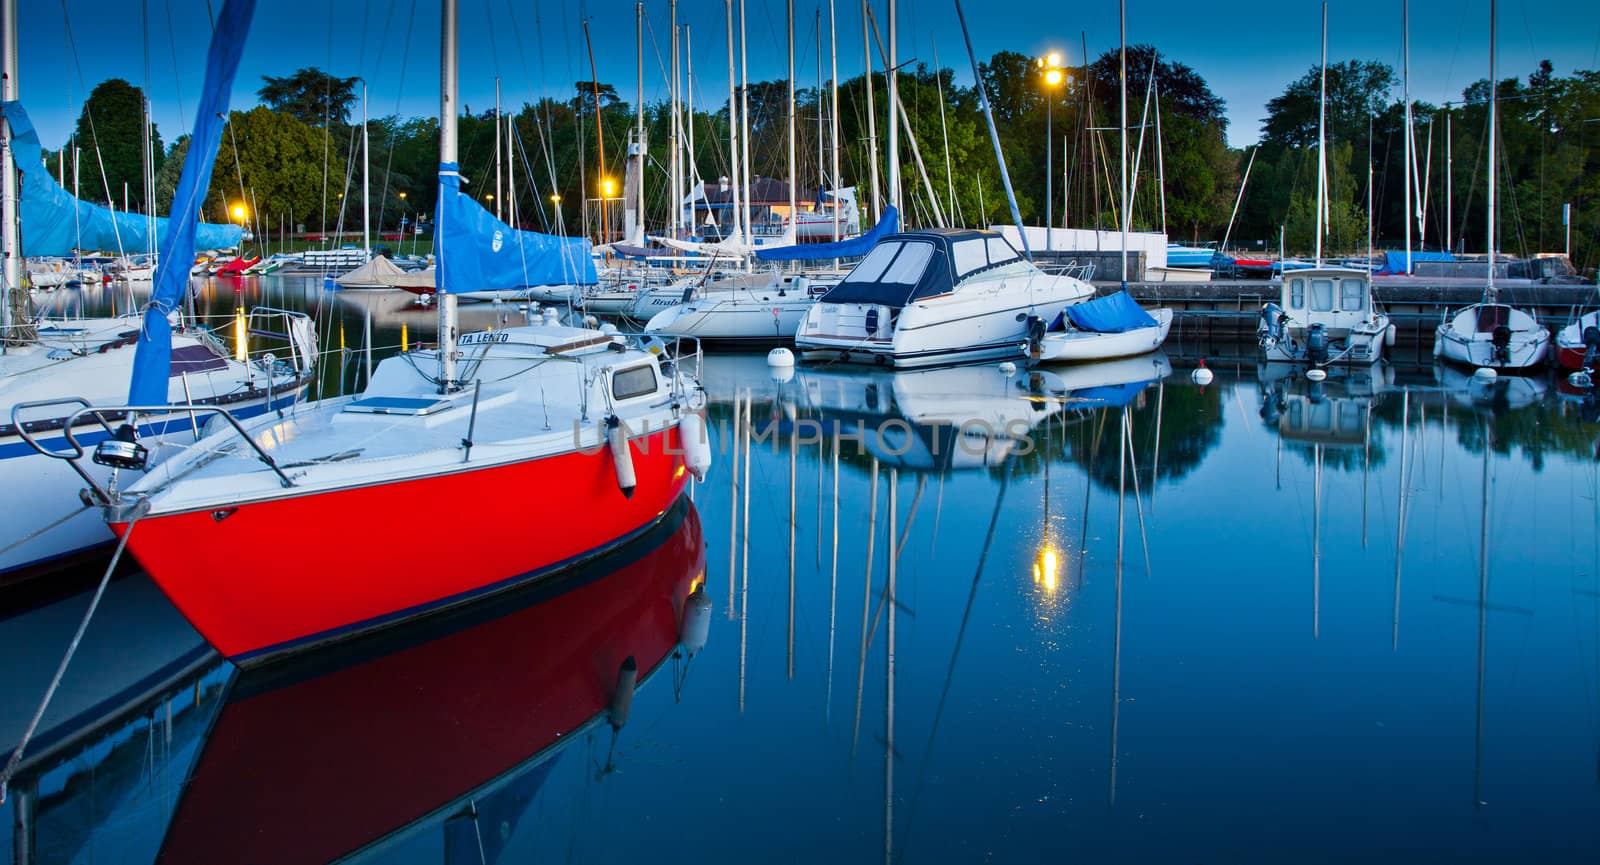 Boats at a marina in the early morning